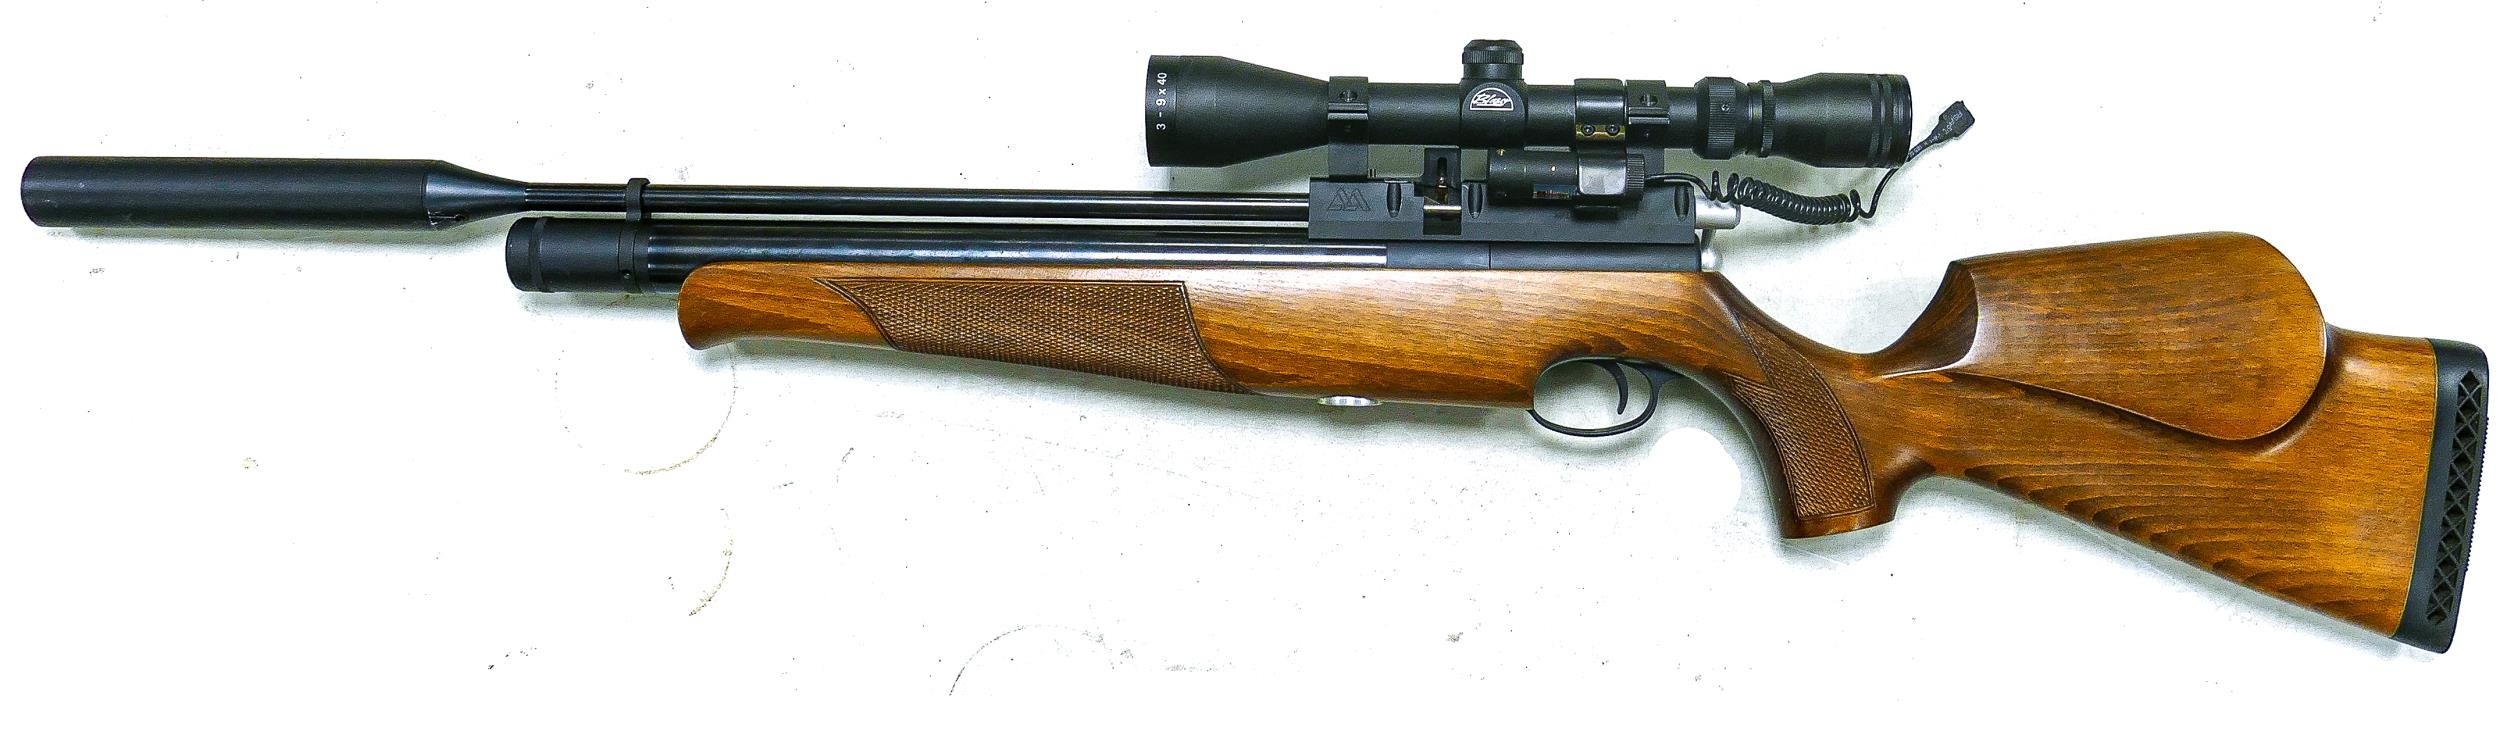 AIR ARMS S410 .177 Carbine English made Air Rifle, fitted Blazer 3-9x40 scope with holdall. - Image 7 of 8